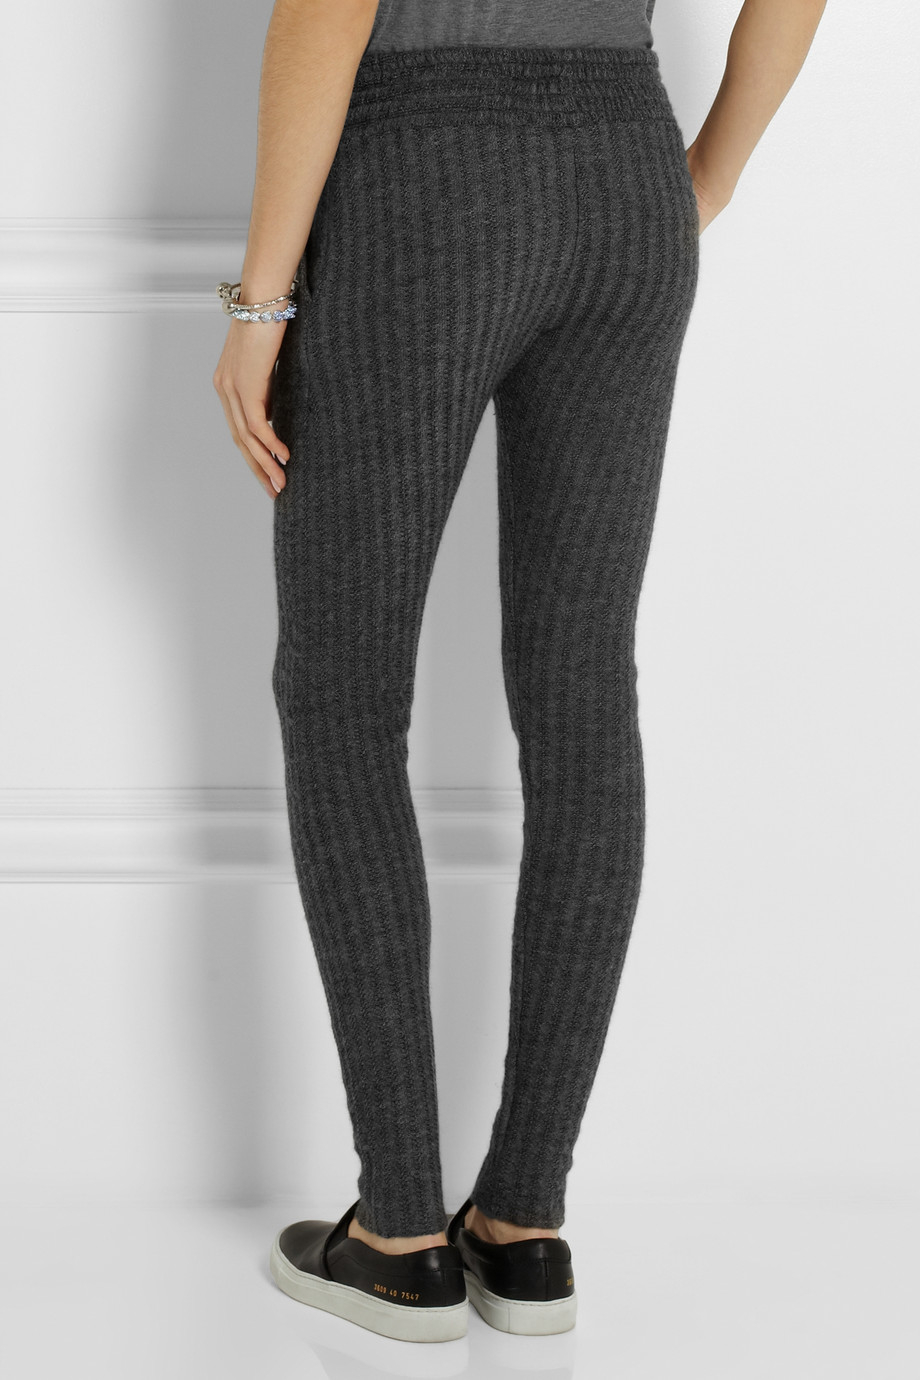 Lyst - The Elder Statesman Ribbed Cashmere Pants in Gray